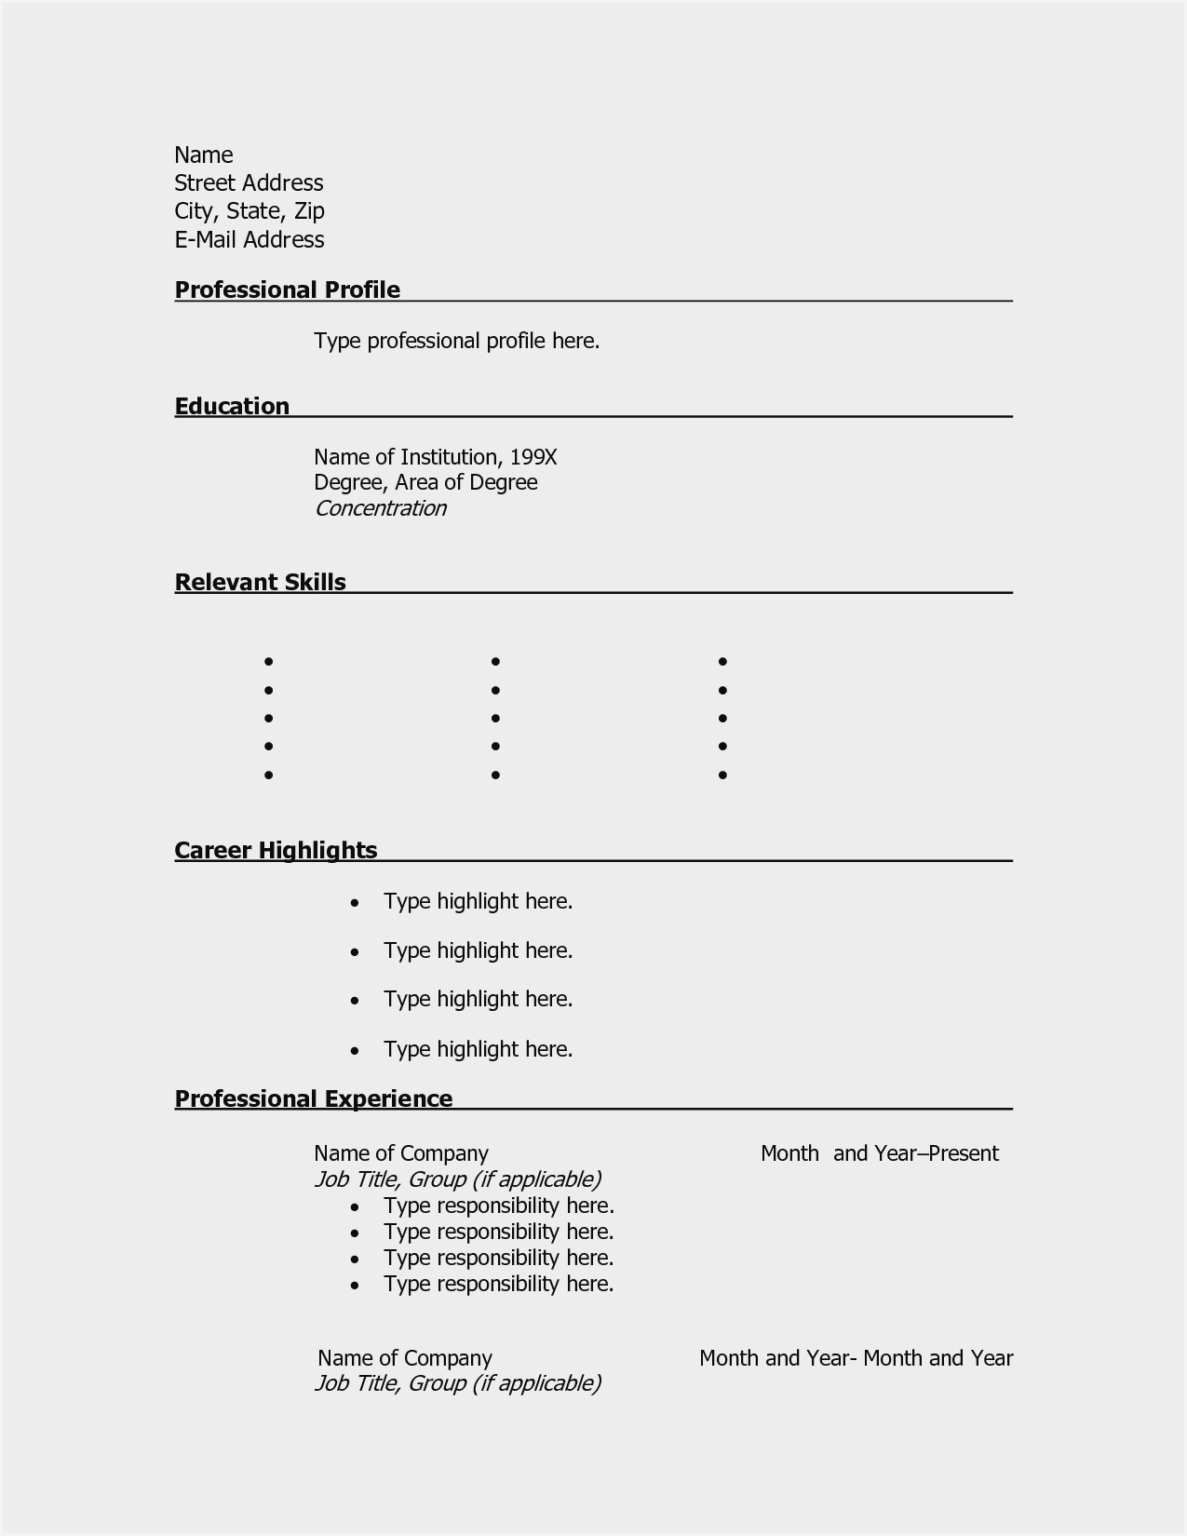 free-blank-resume-templates-download-resume-resume-with-free-blank